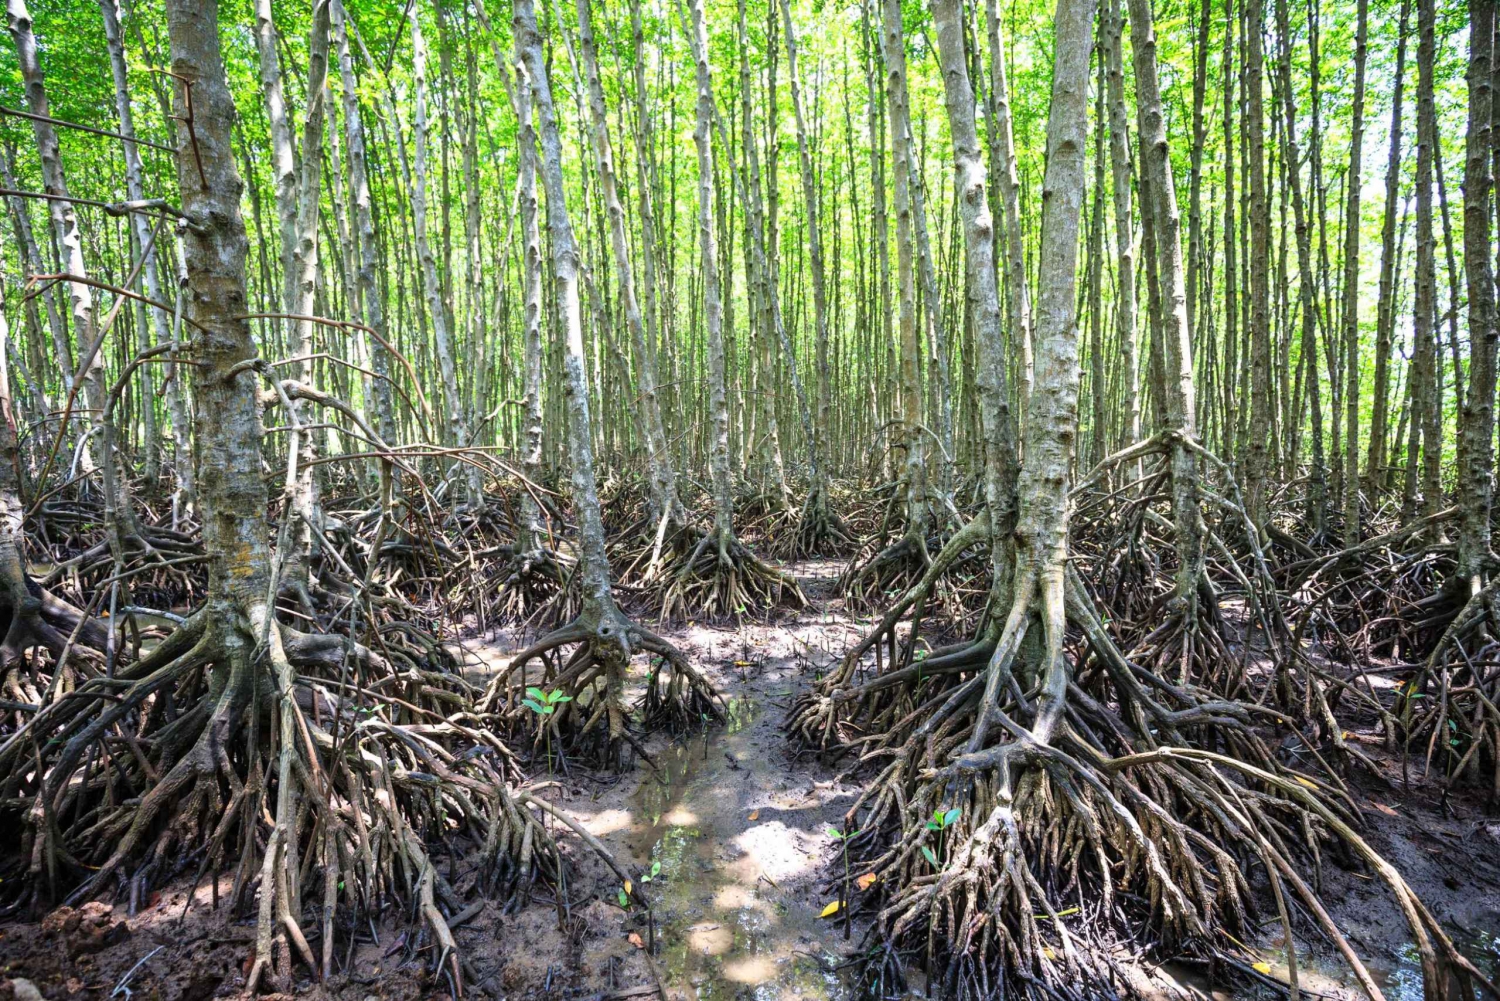 Vam Sat Mangrove Forest Private Tour from Ho Chi Minh City